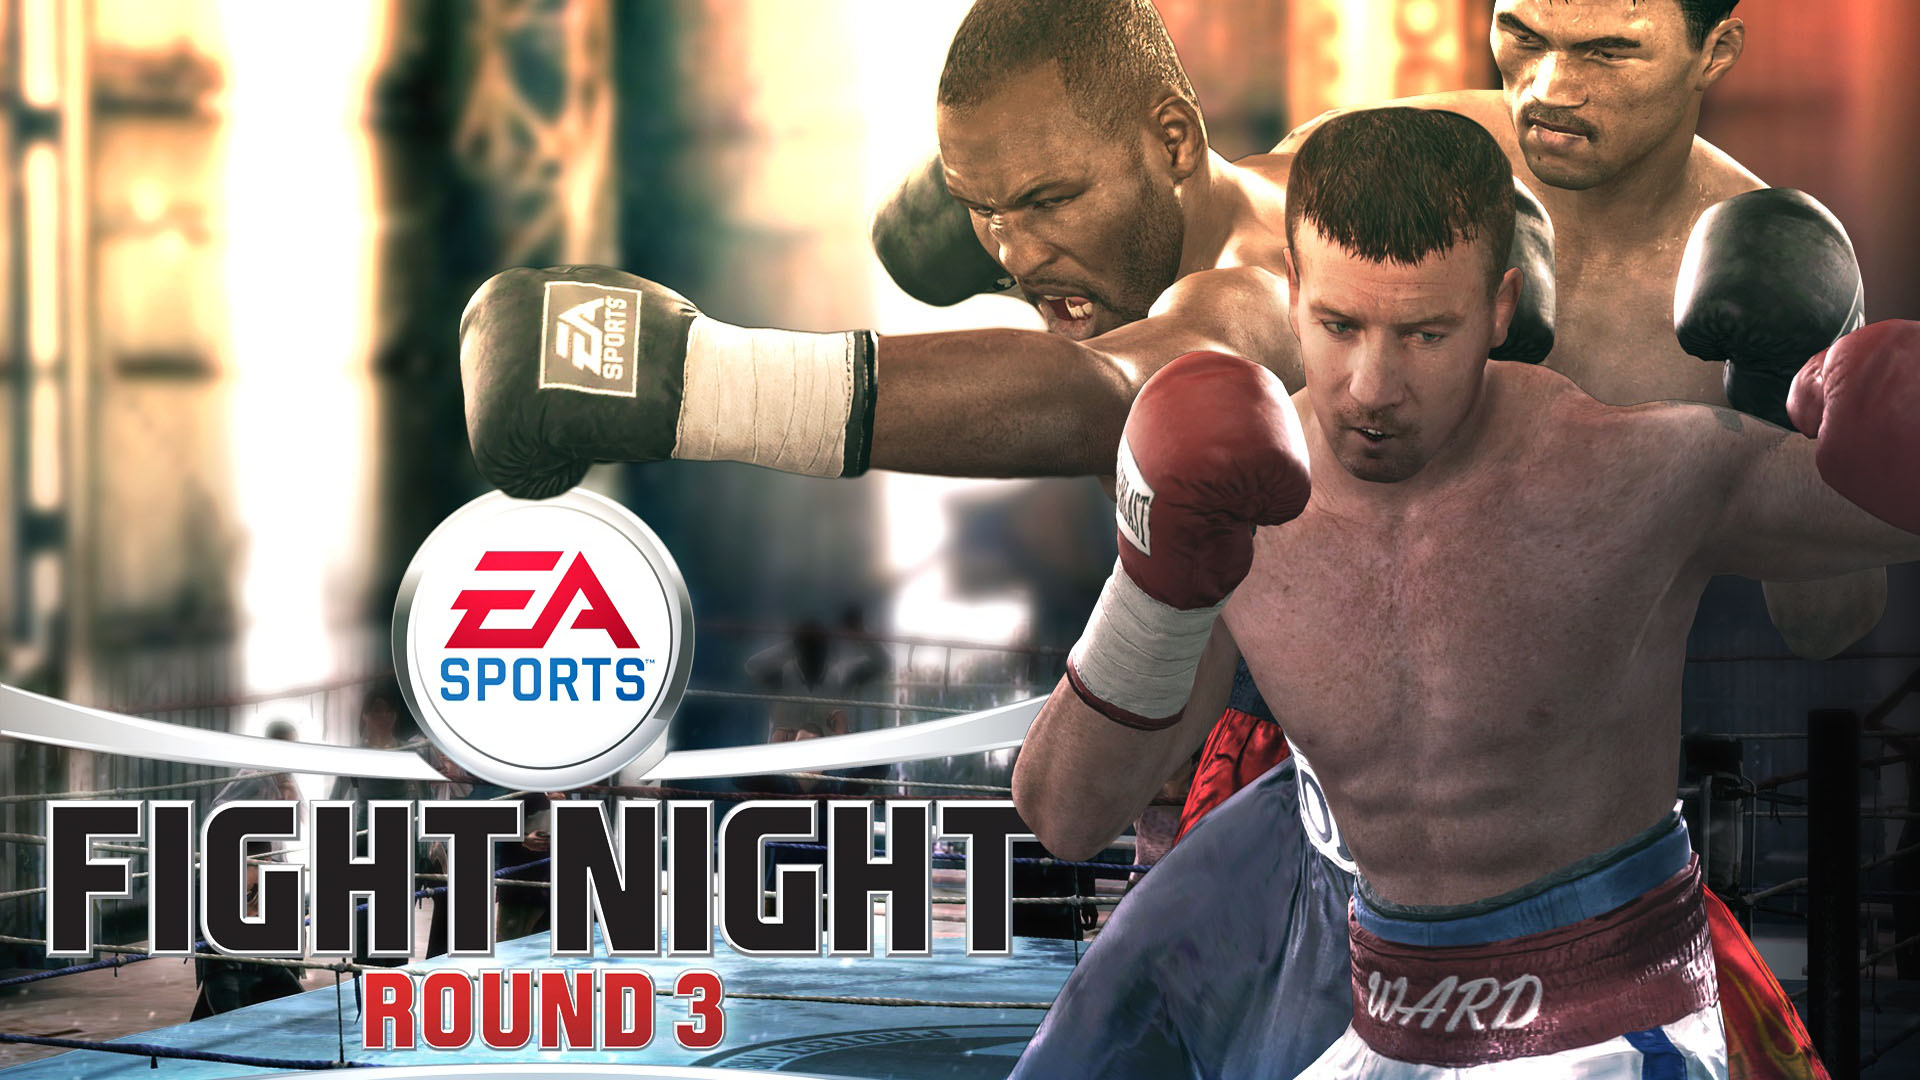 Nice Images Collection: Fight Night Round 3 Desktop Wallpapers